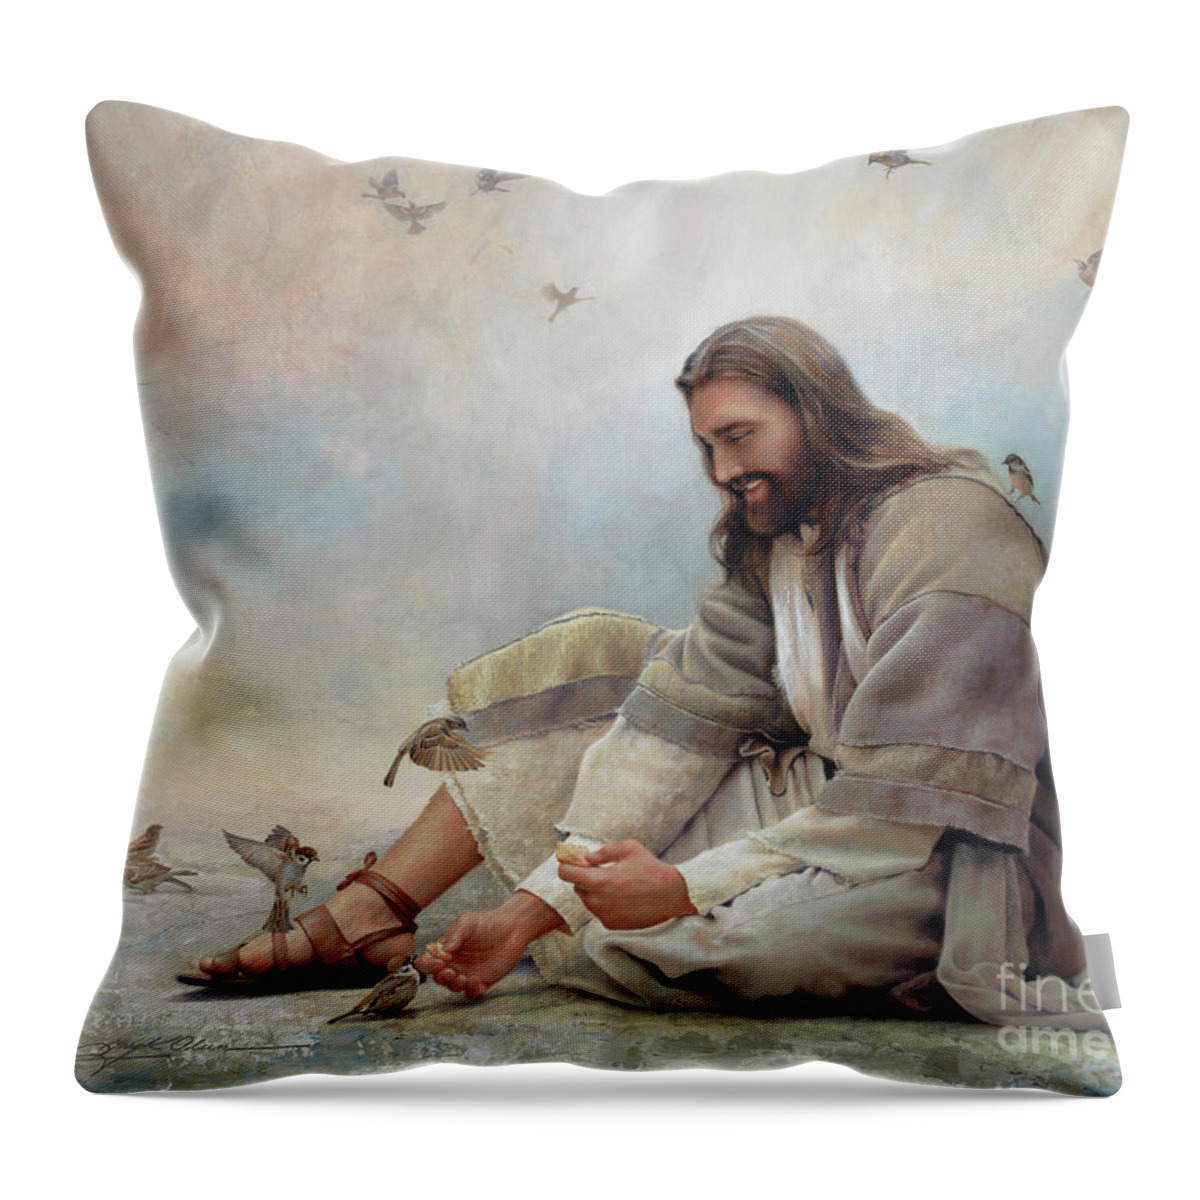 Jesus Throw Pillow featuring the painting Even A Sparrow by Greg Olsen